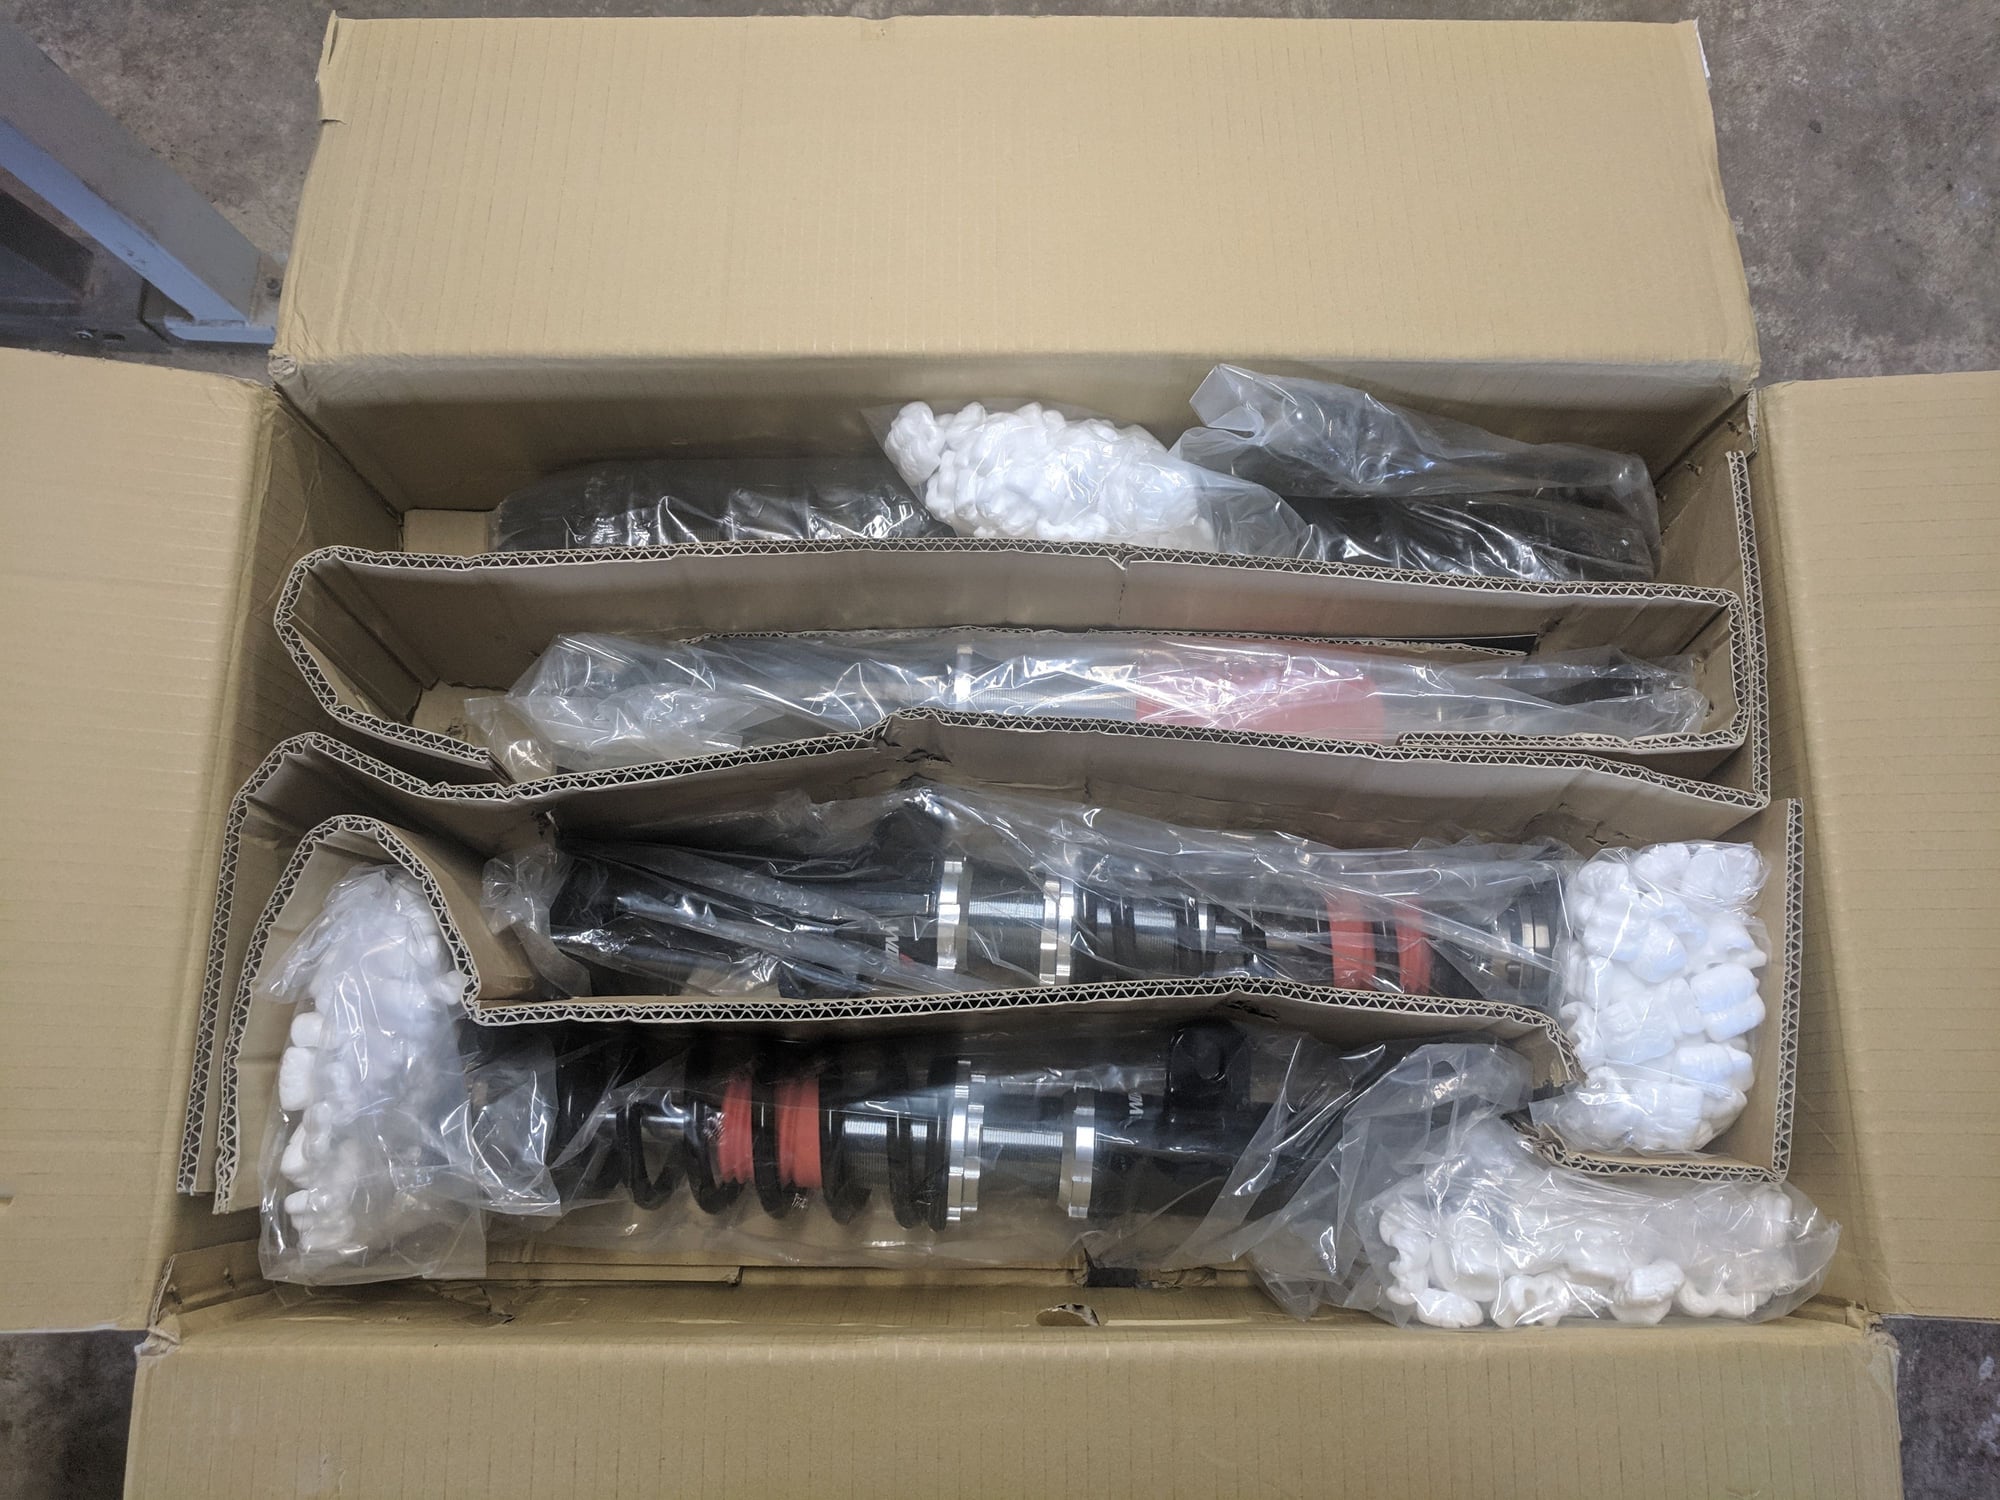 Steering/Suspension - W204 Coilovers BNIB - New - 2008 to 2014 Mercedes-Benz C63 AMG - 2008 to 2014 Mercedes-Benz C250 - 2008 to 2014 Mercedes-Benz C300 - 2008 to 2014 Mercedes-Benz C350 - Crosby, TX 77532, United States